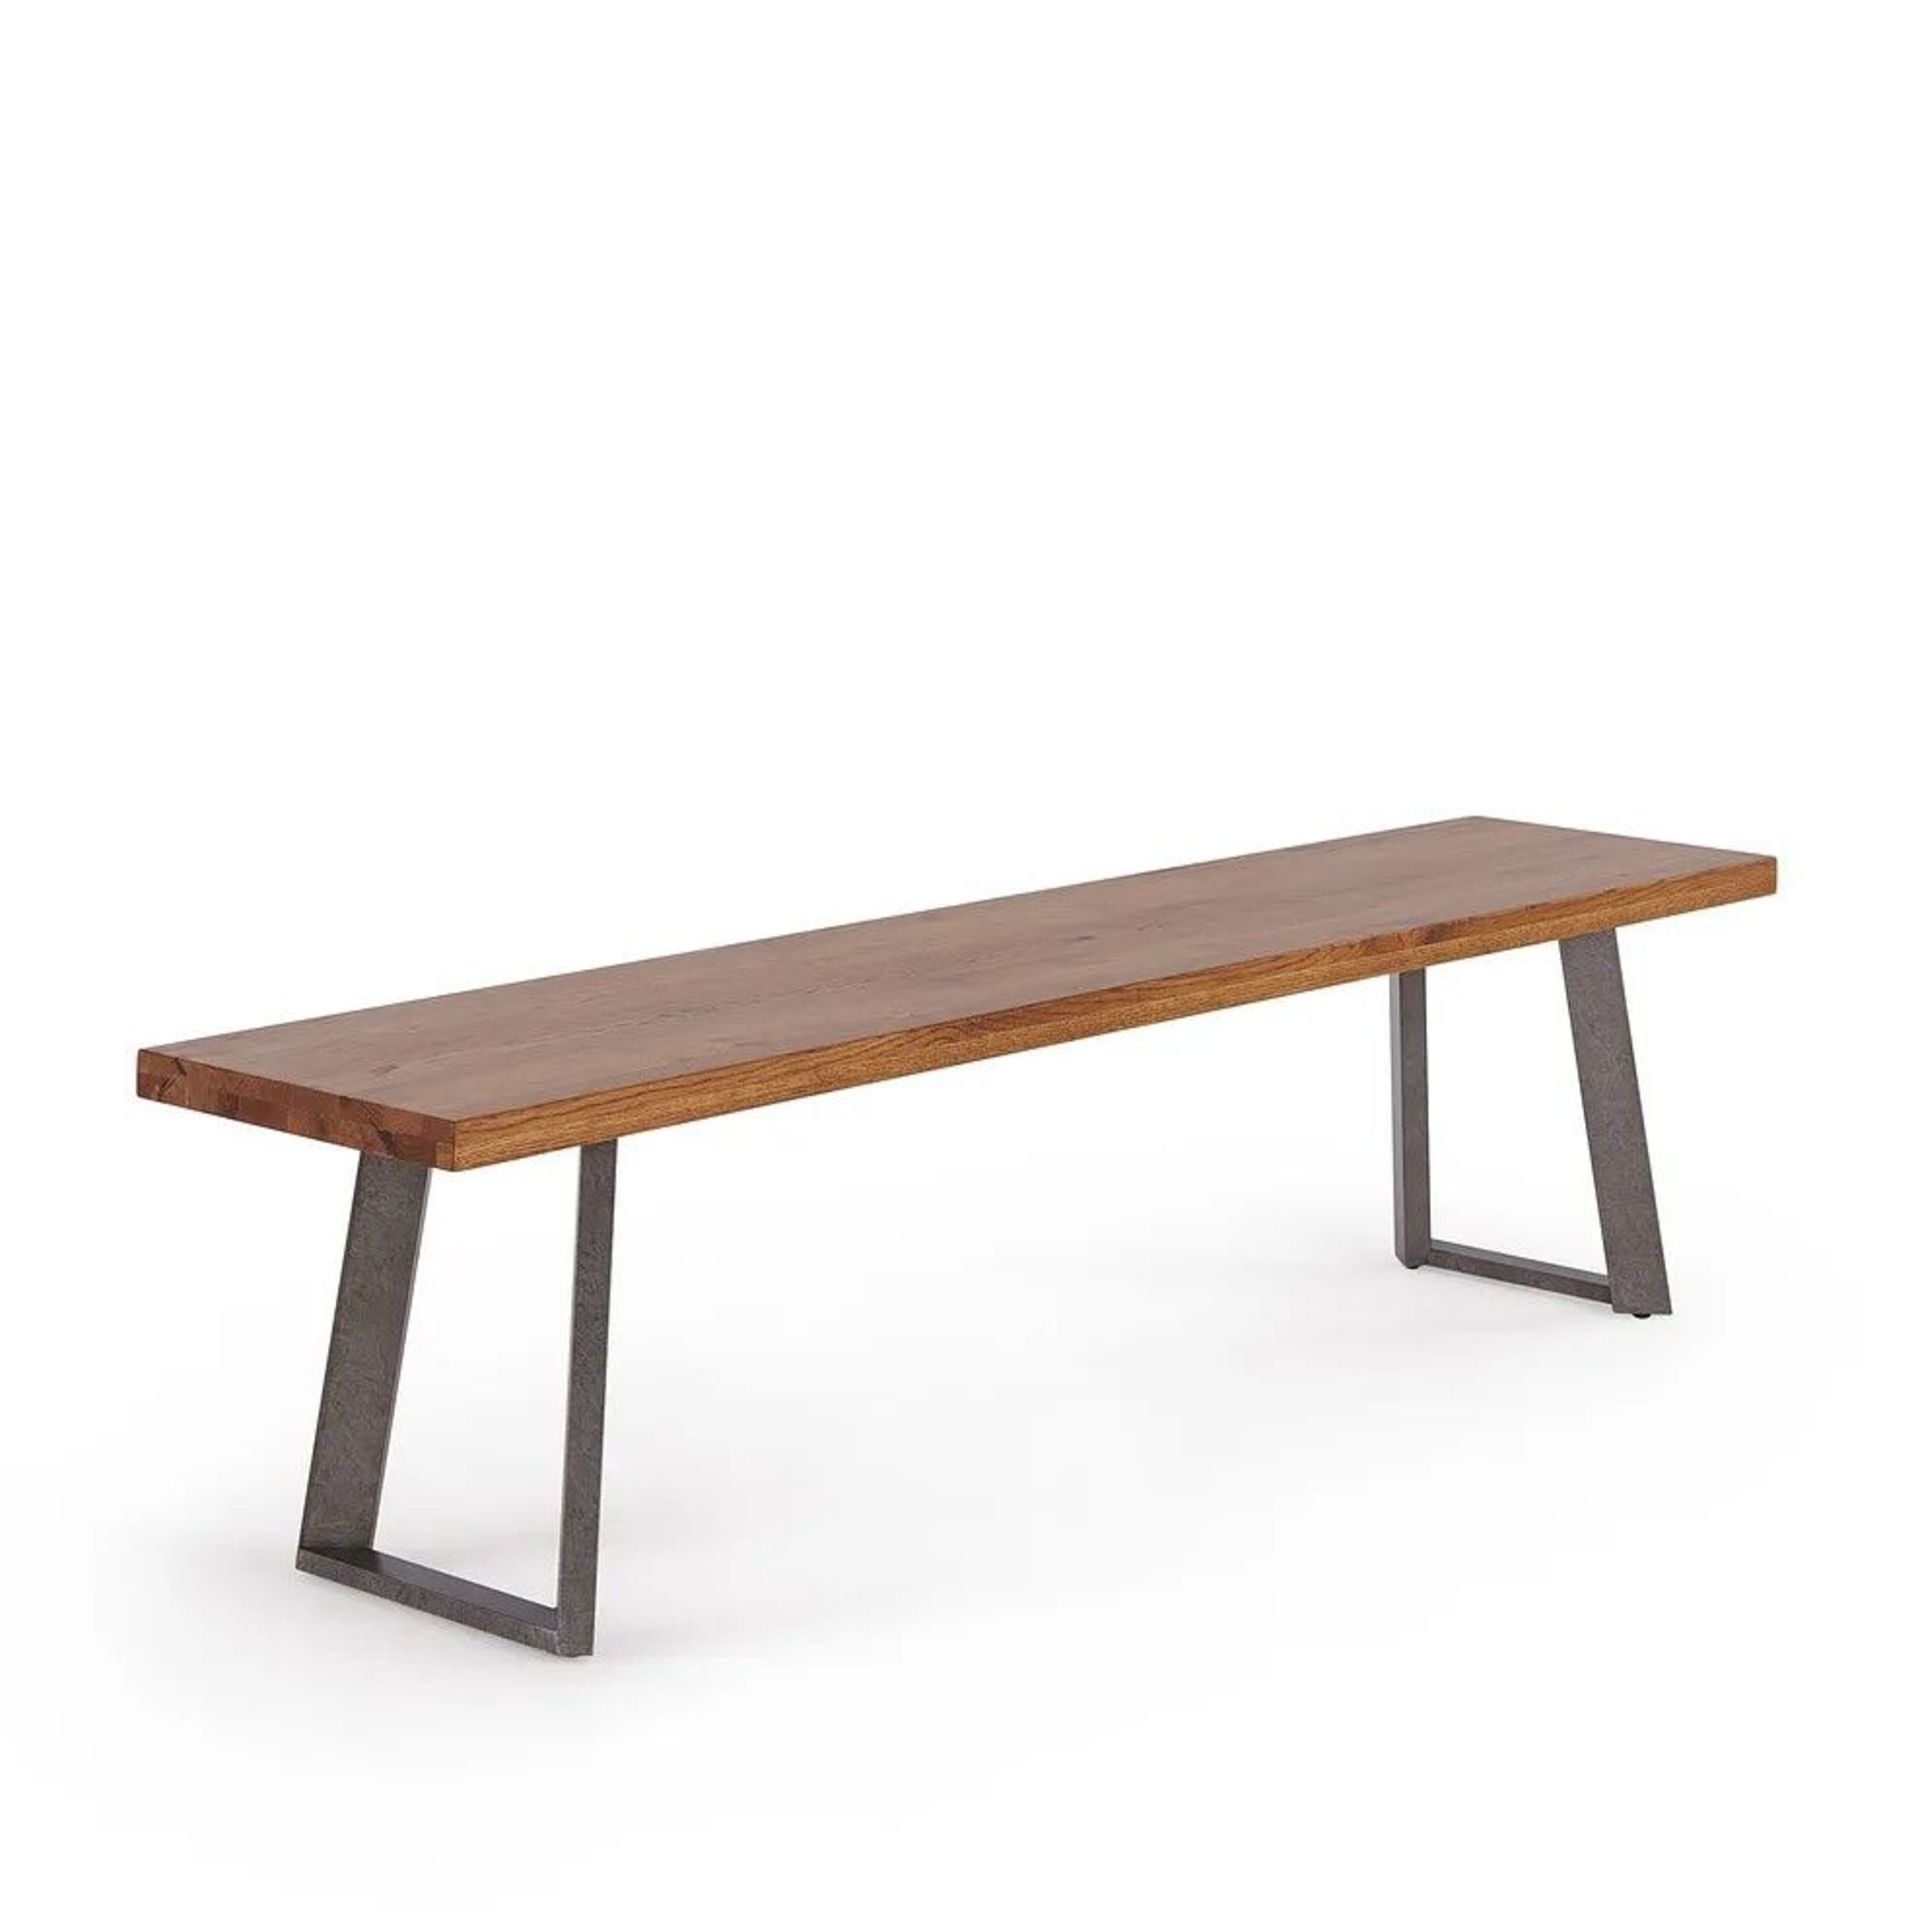 New Boxed - Cantilever Rustic Solid Oak Bench. 180cm Long. RRP £330. For a more open seating